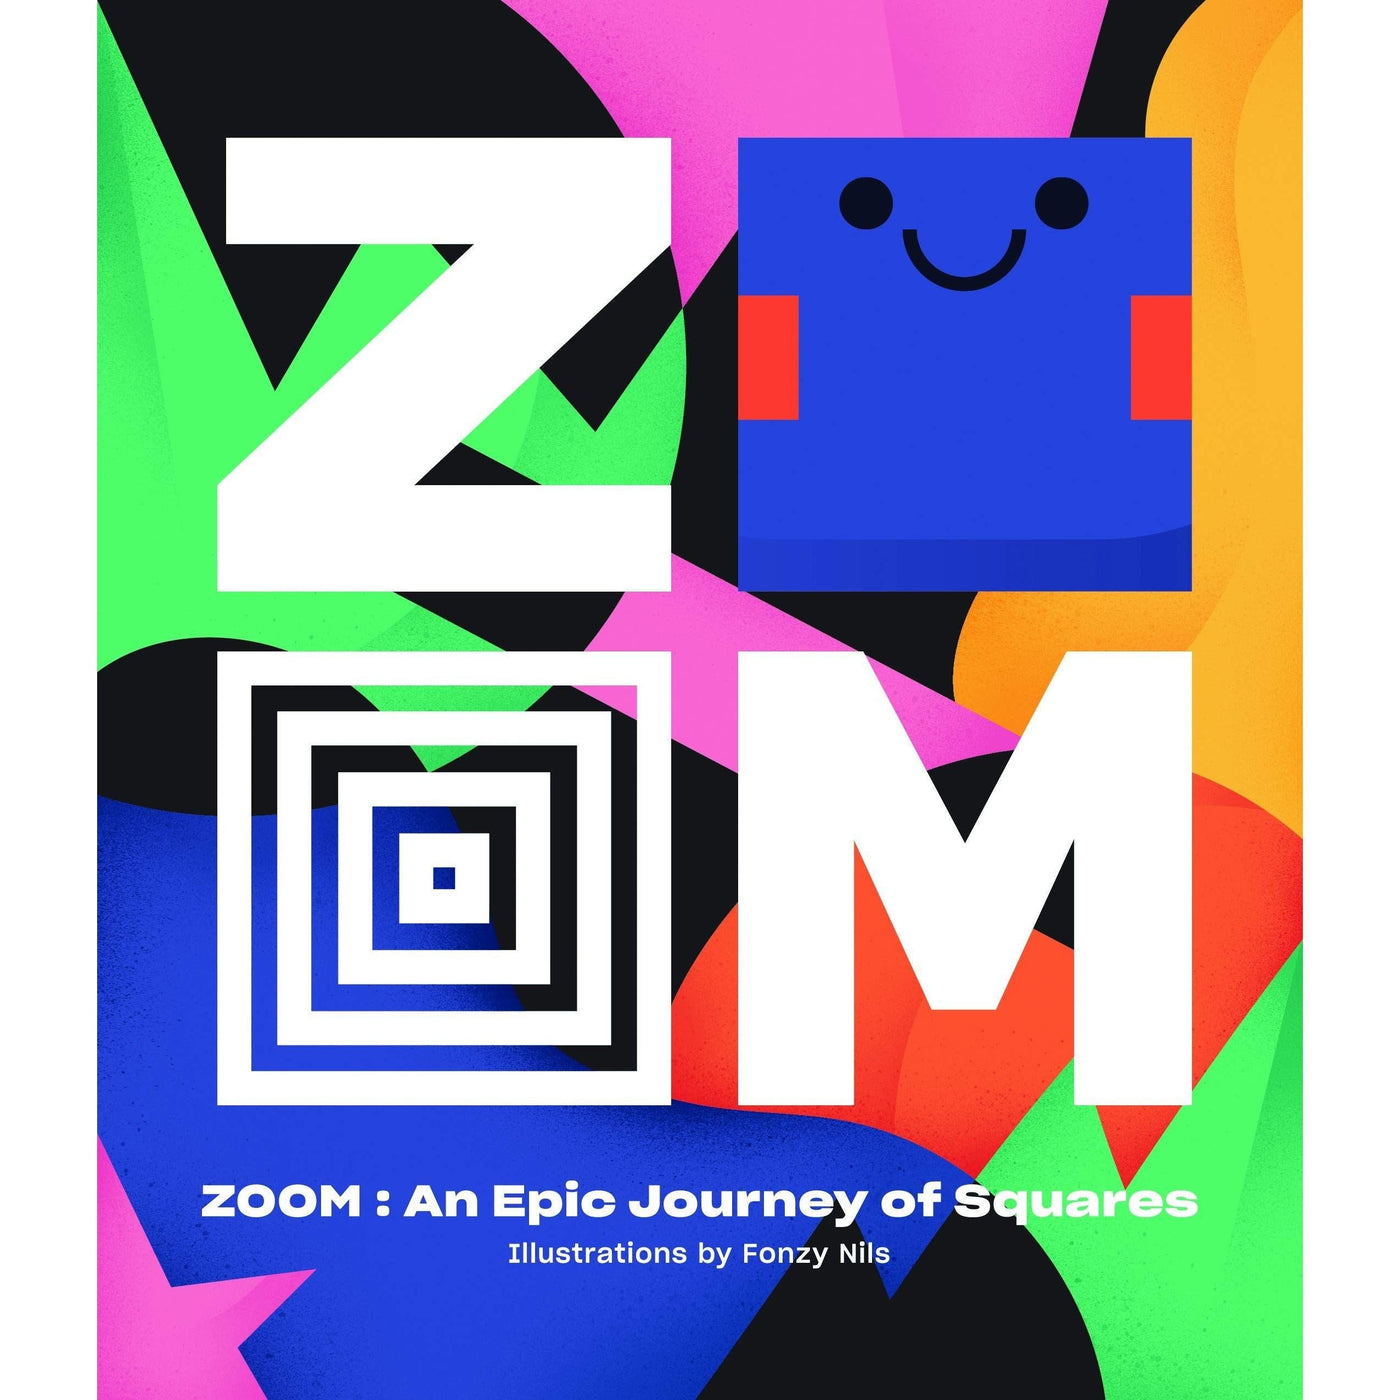 Zoom — An Epic Journey Through Squares